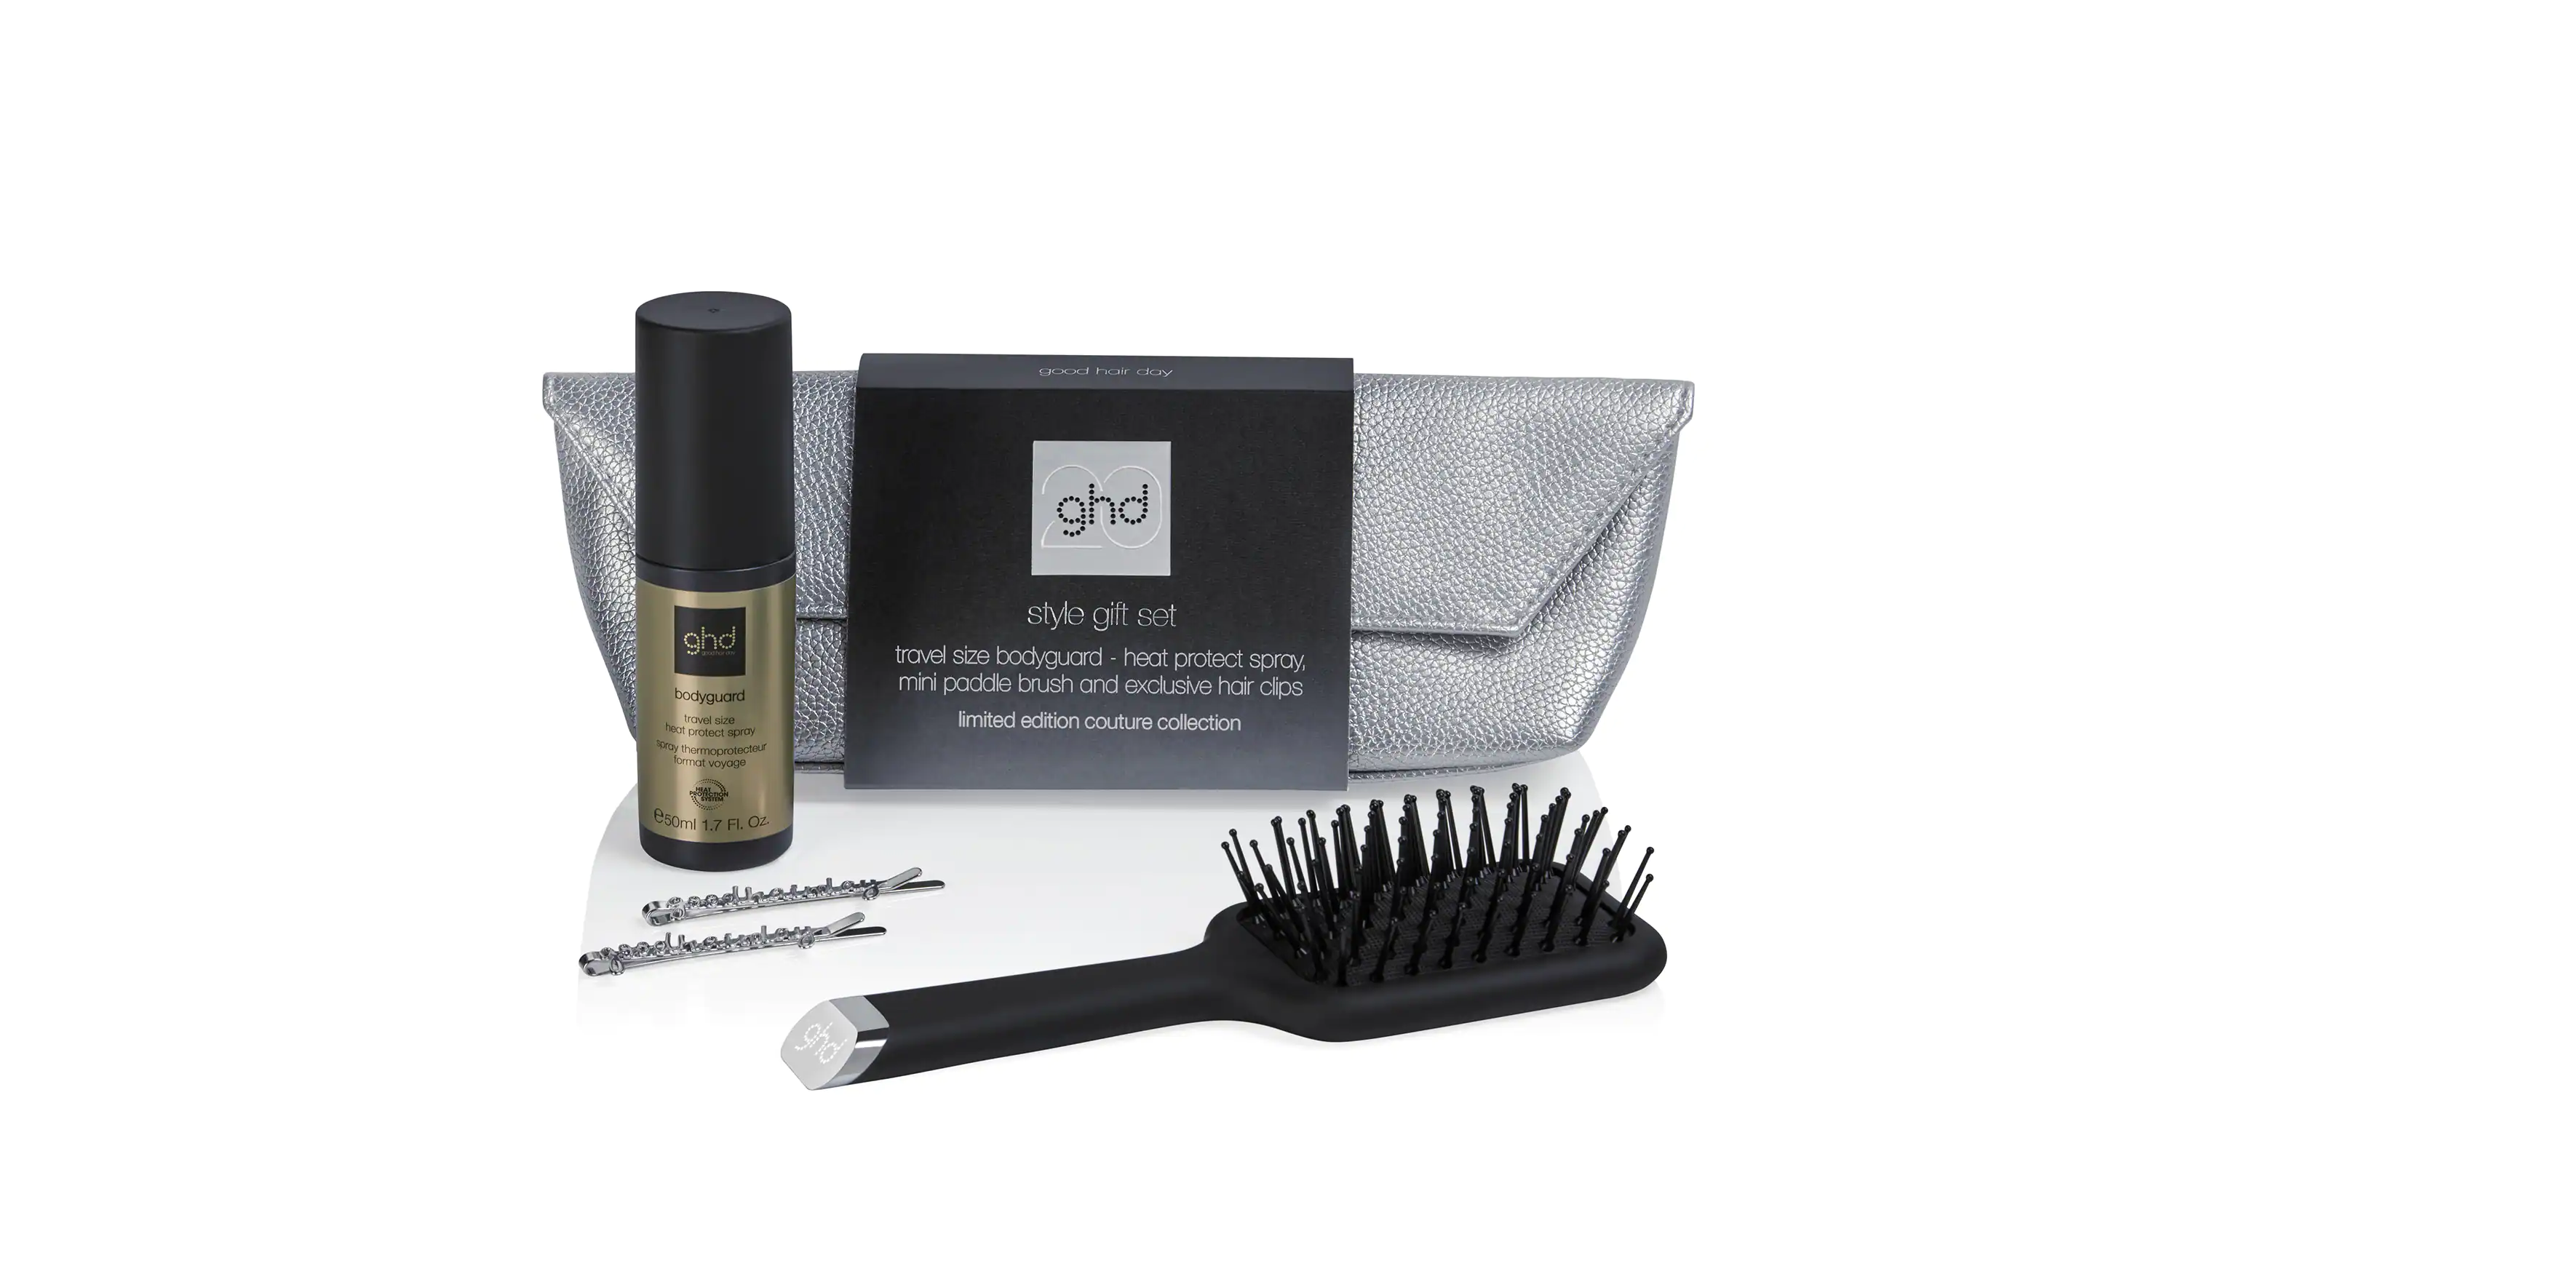 Ghd style gift set couture colletion